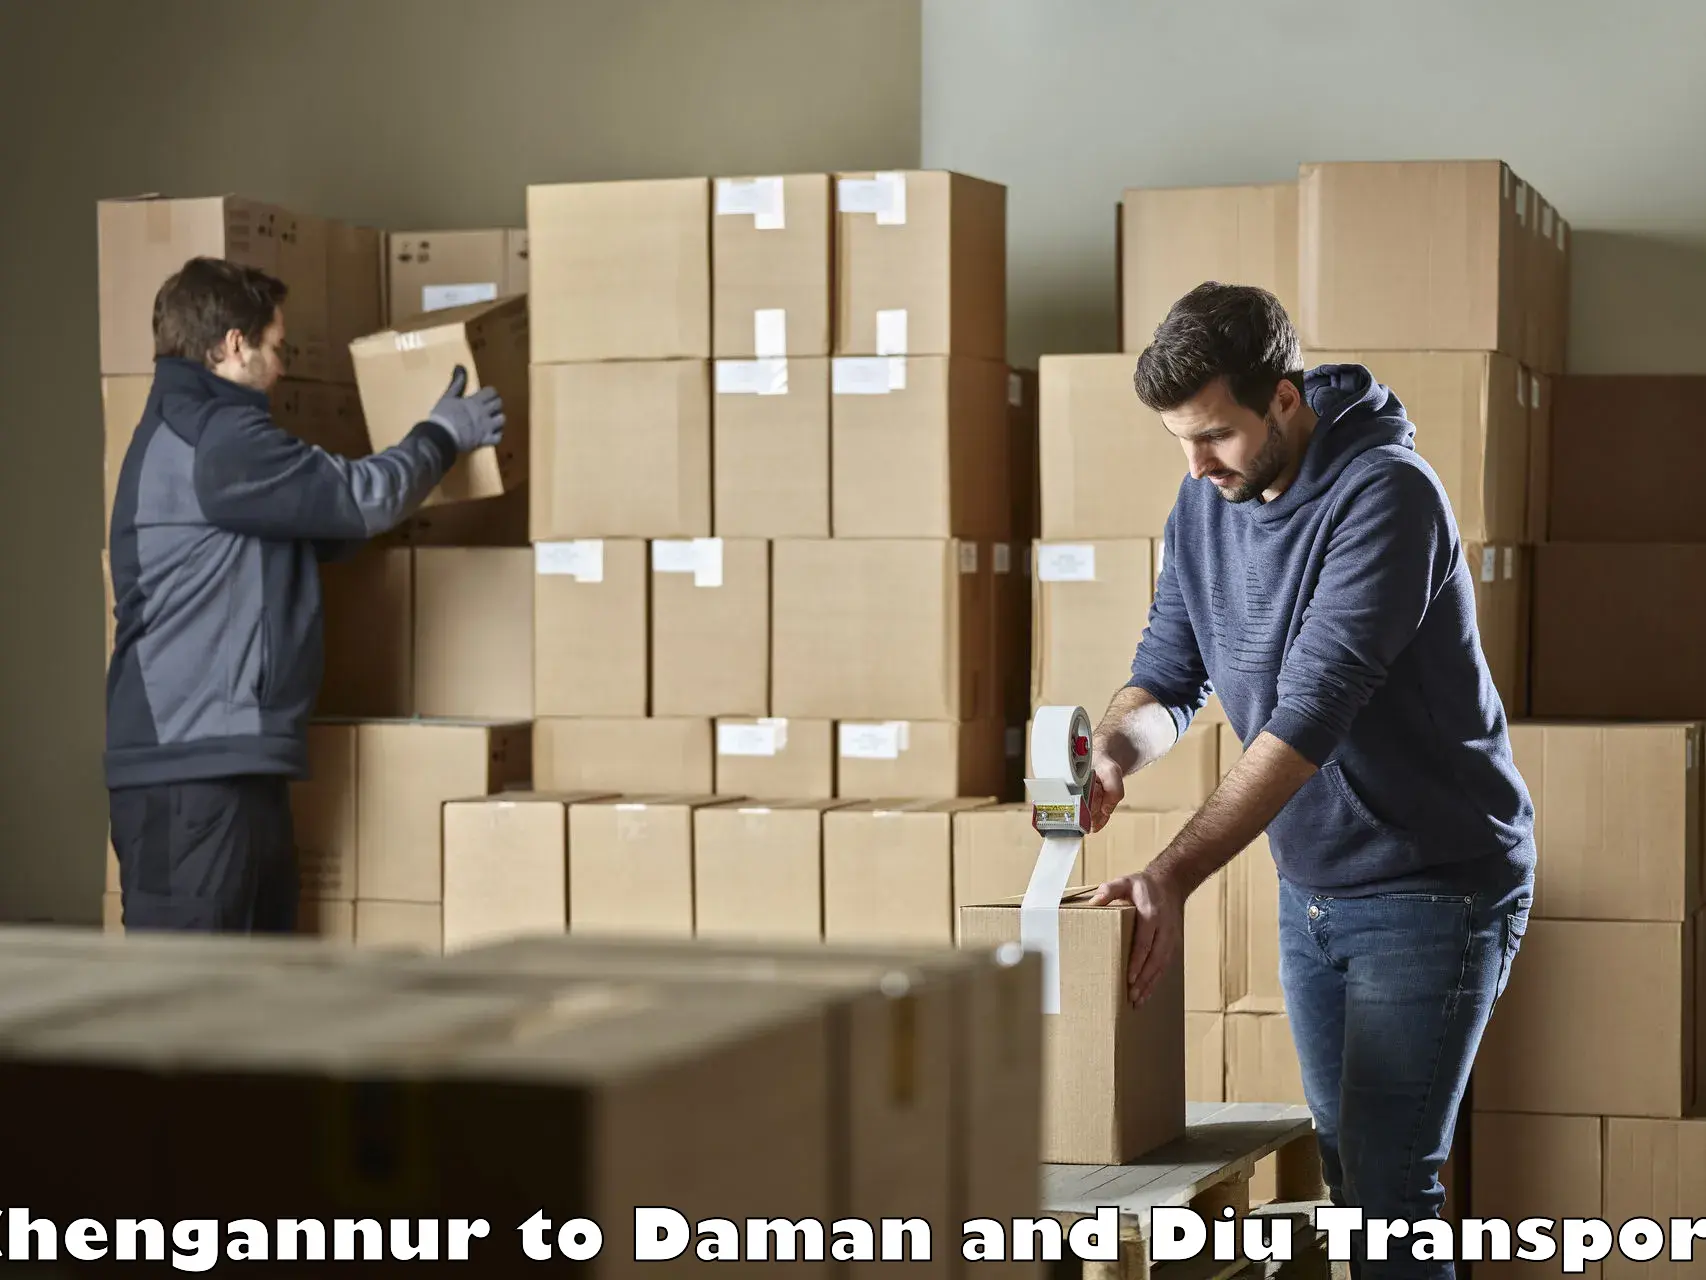 Daily parcel service transport in Chengannur to Daman and Diu